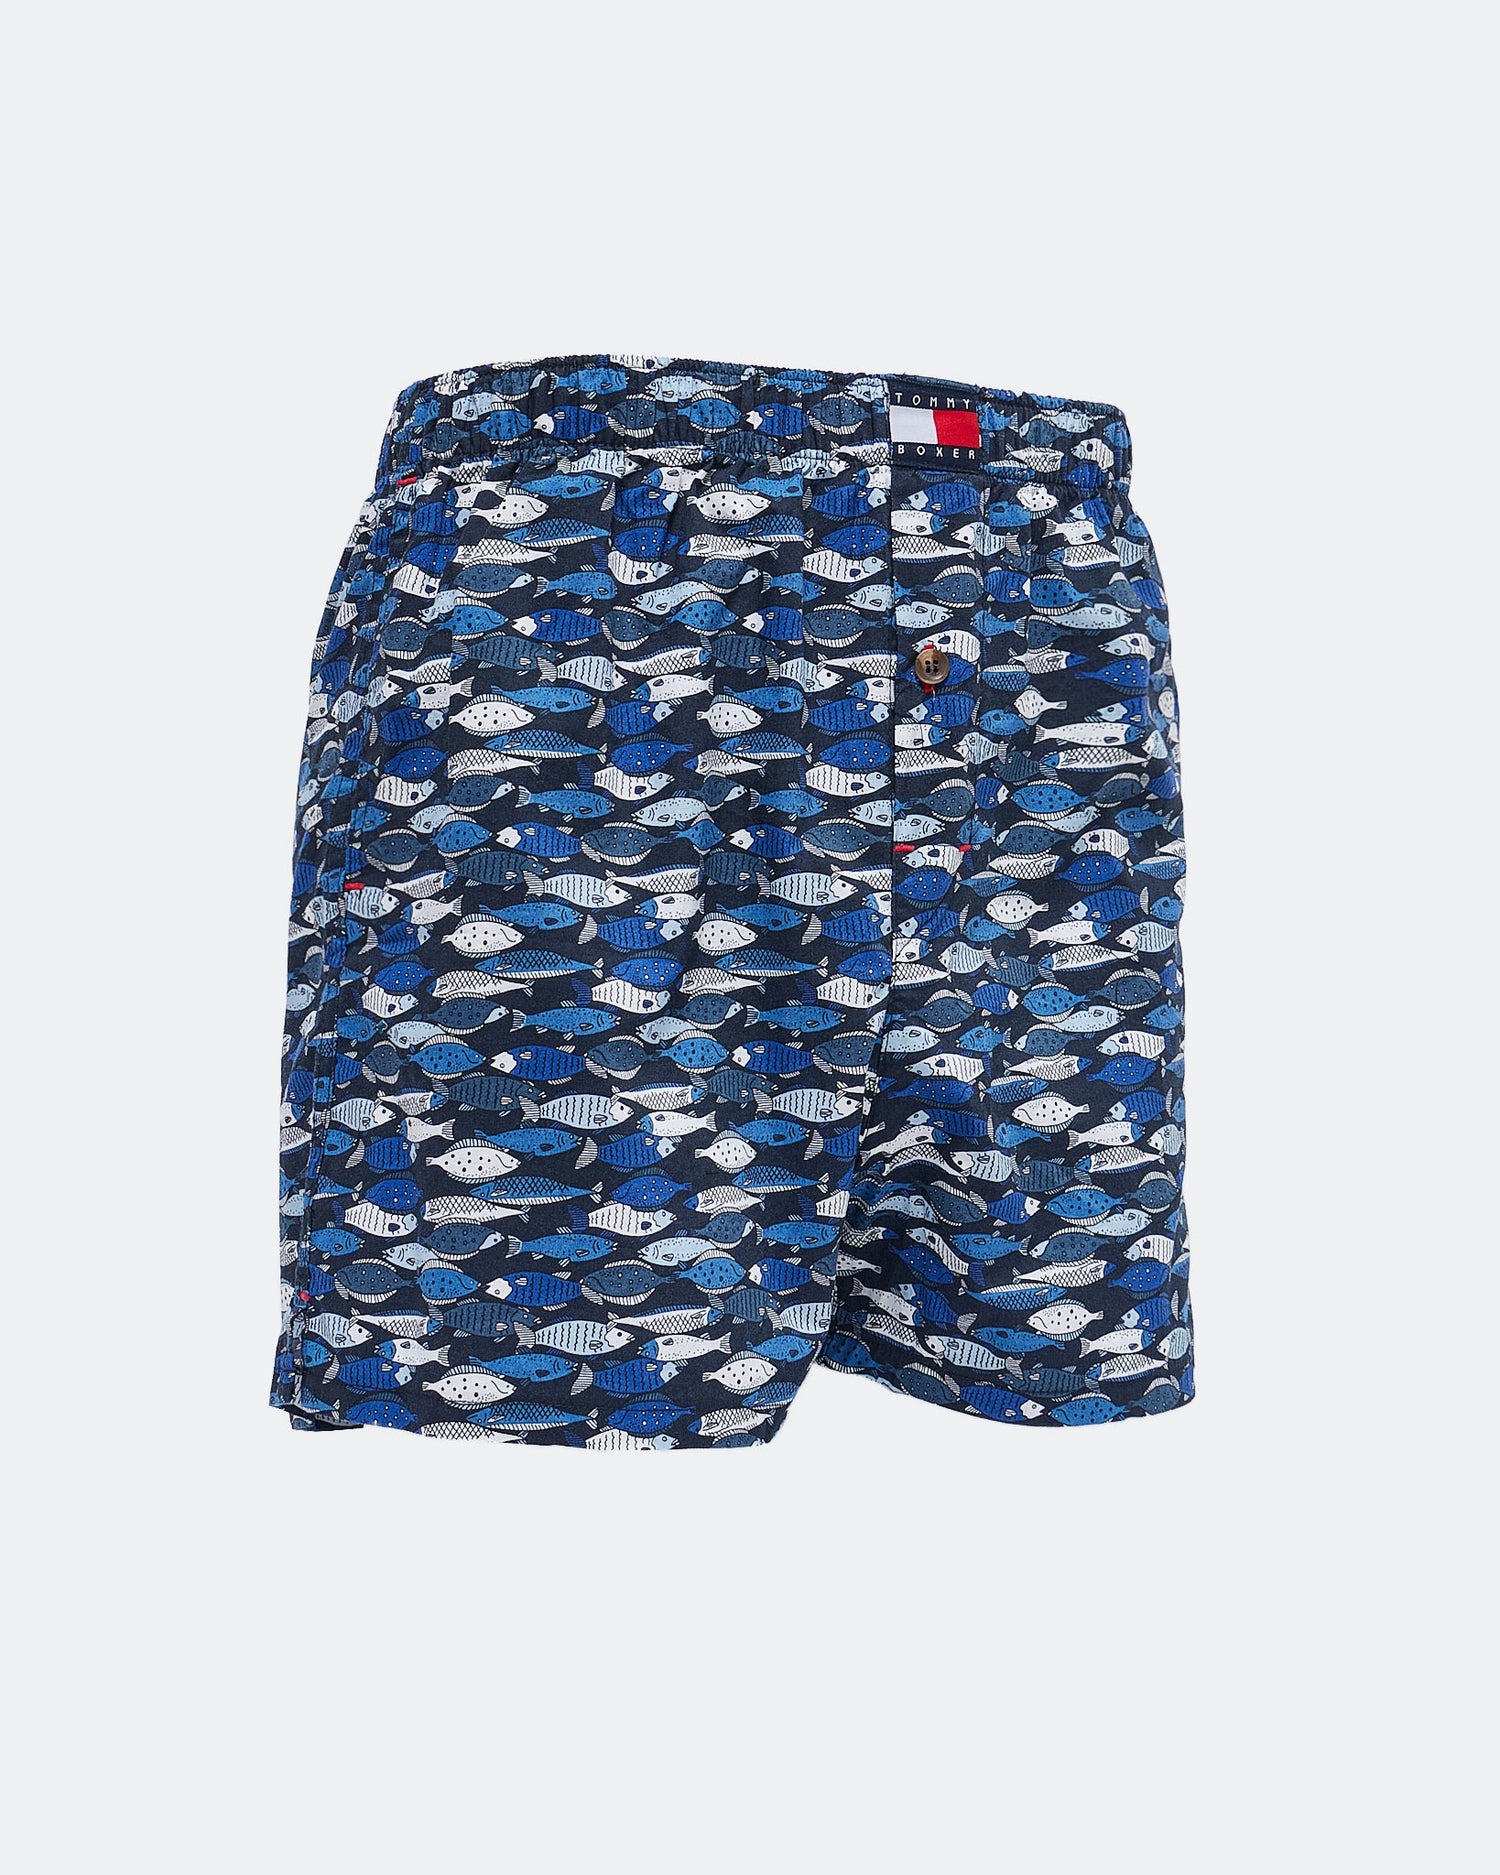 MOI OUTFIT-Fish Over Printed Men Boxer 6.90